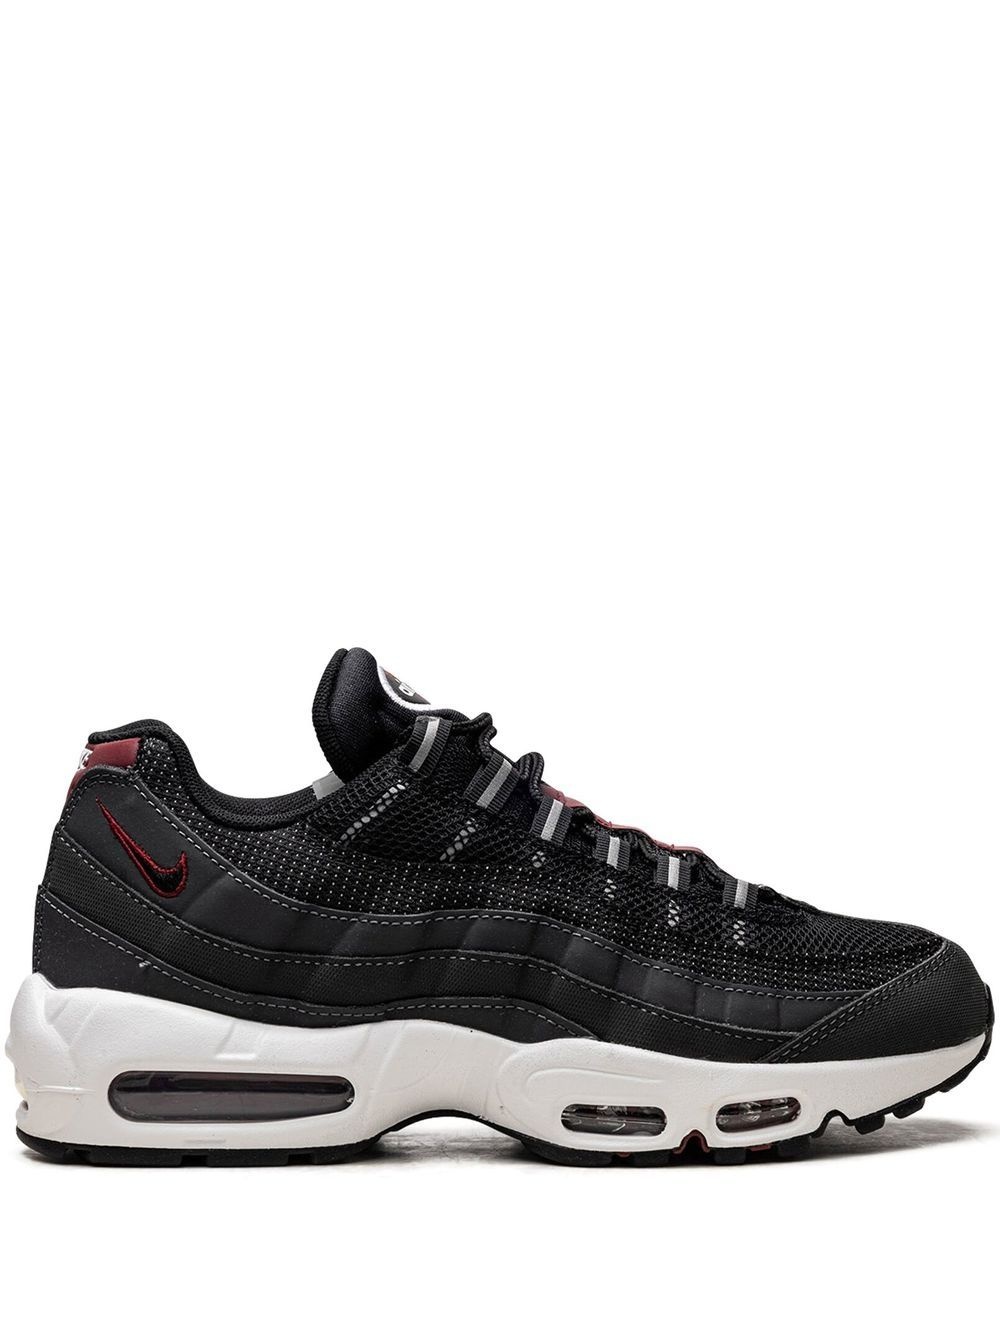 Air Max 95 "Anthracite/Team Red/Summit White" sneakers - 1